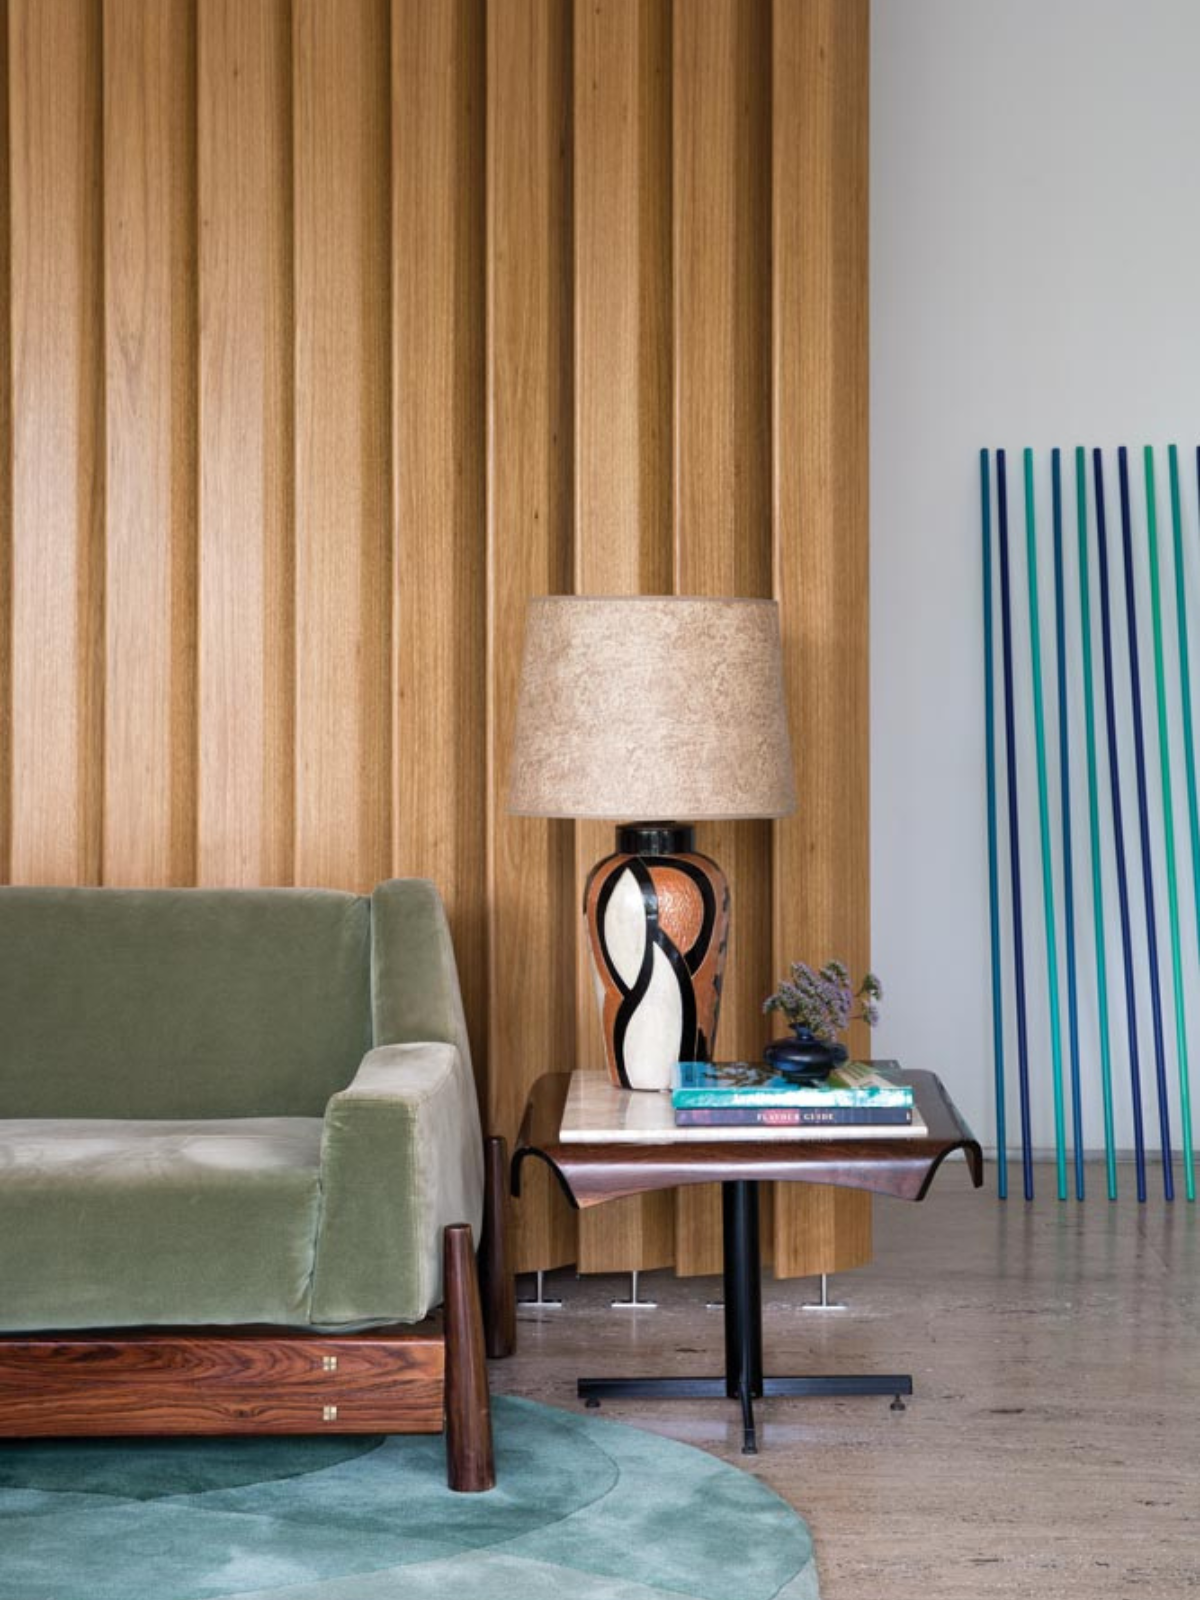 living room showing vertical accent wood panels, green upholstered couch, table lamp and blue area rug